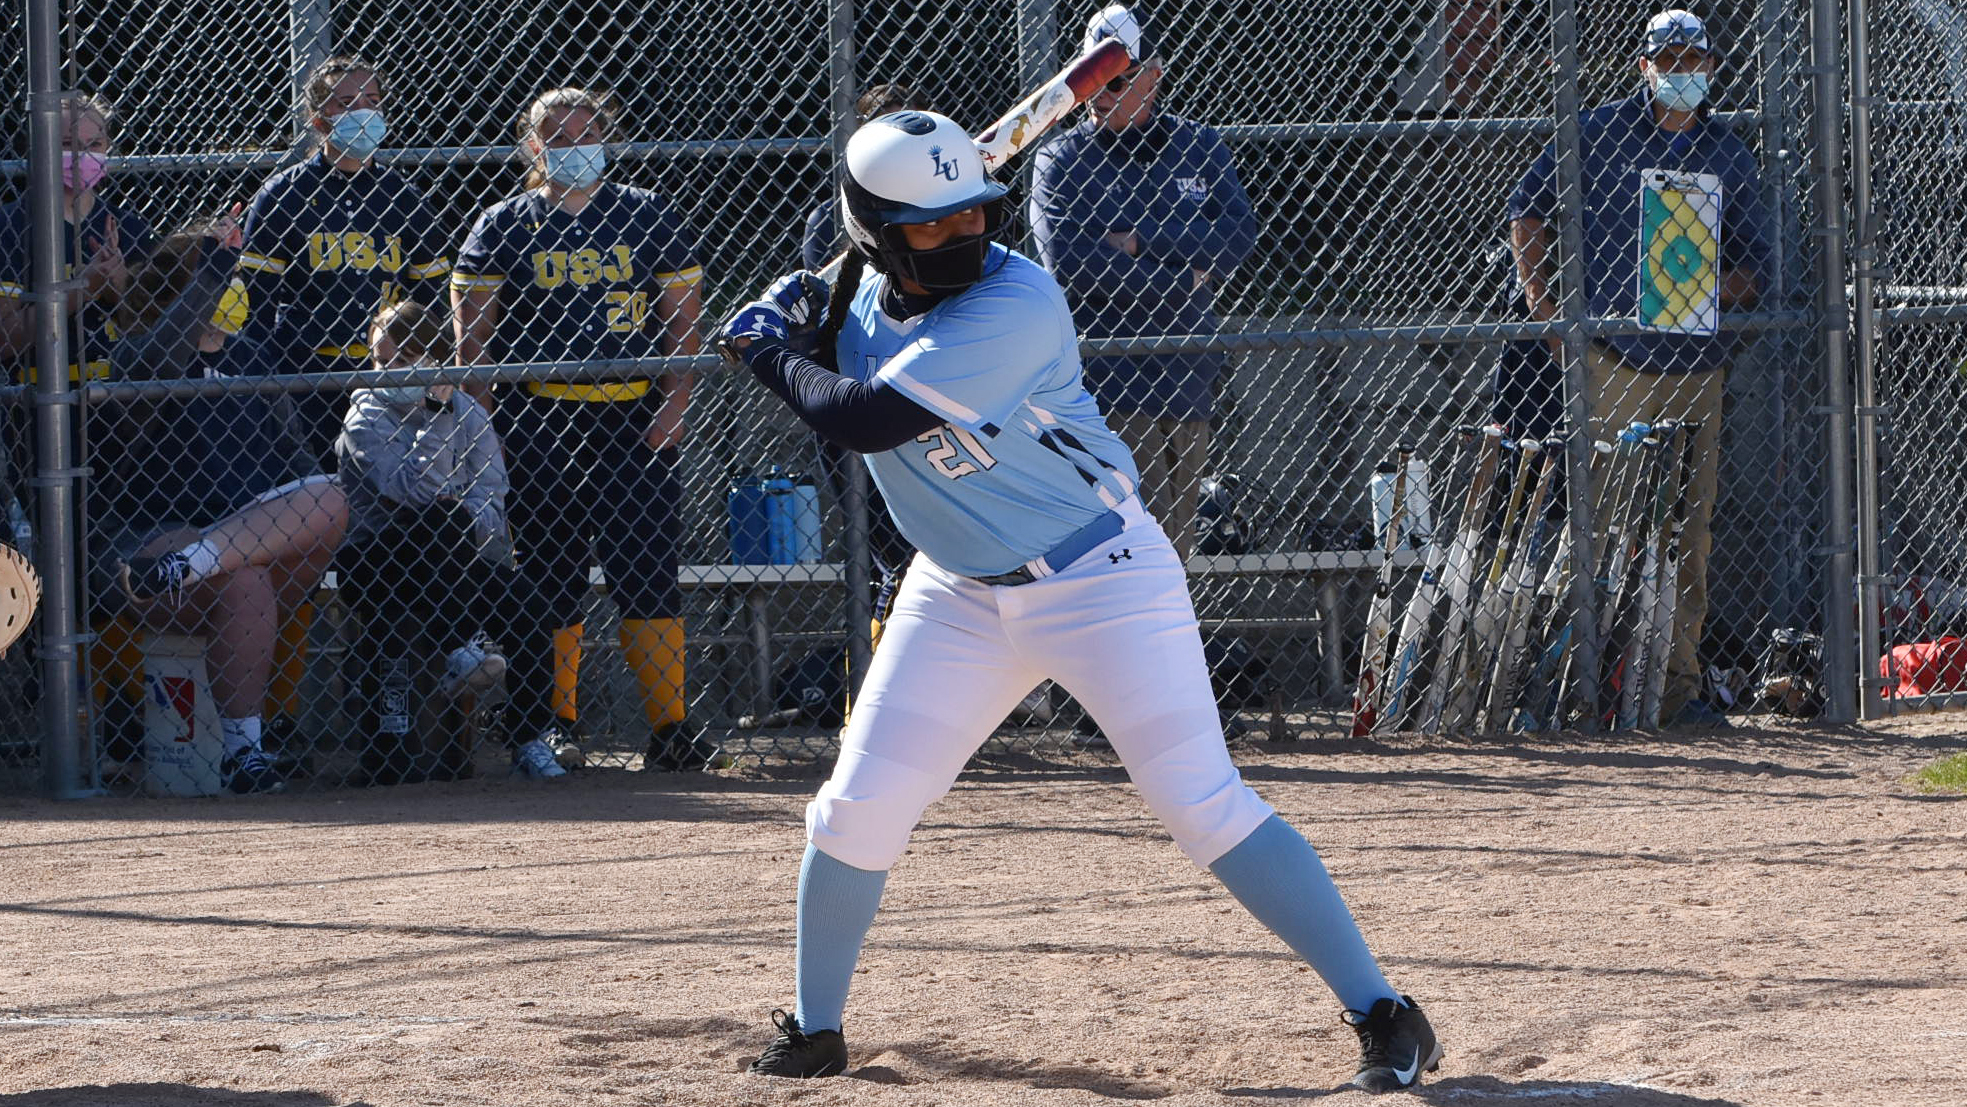 Softball: Lasers close out spring break trip with spilt against Maine Farmington and Mt. St. Mary (NY)